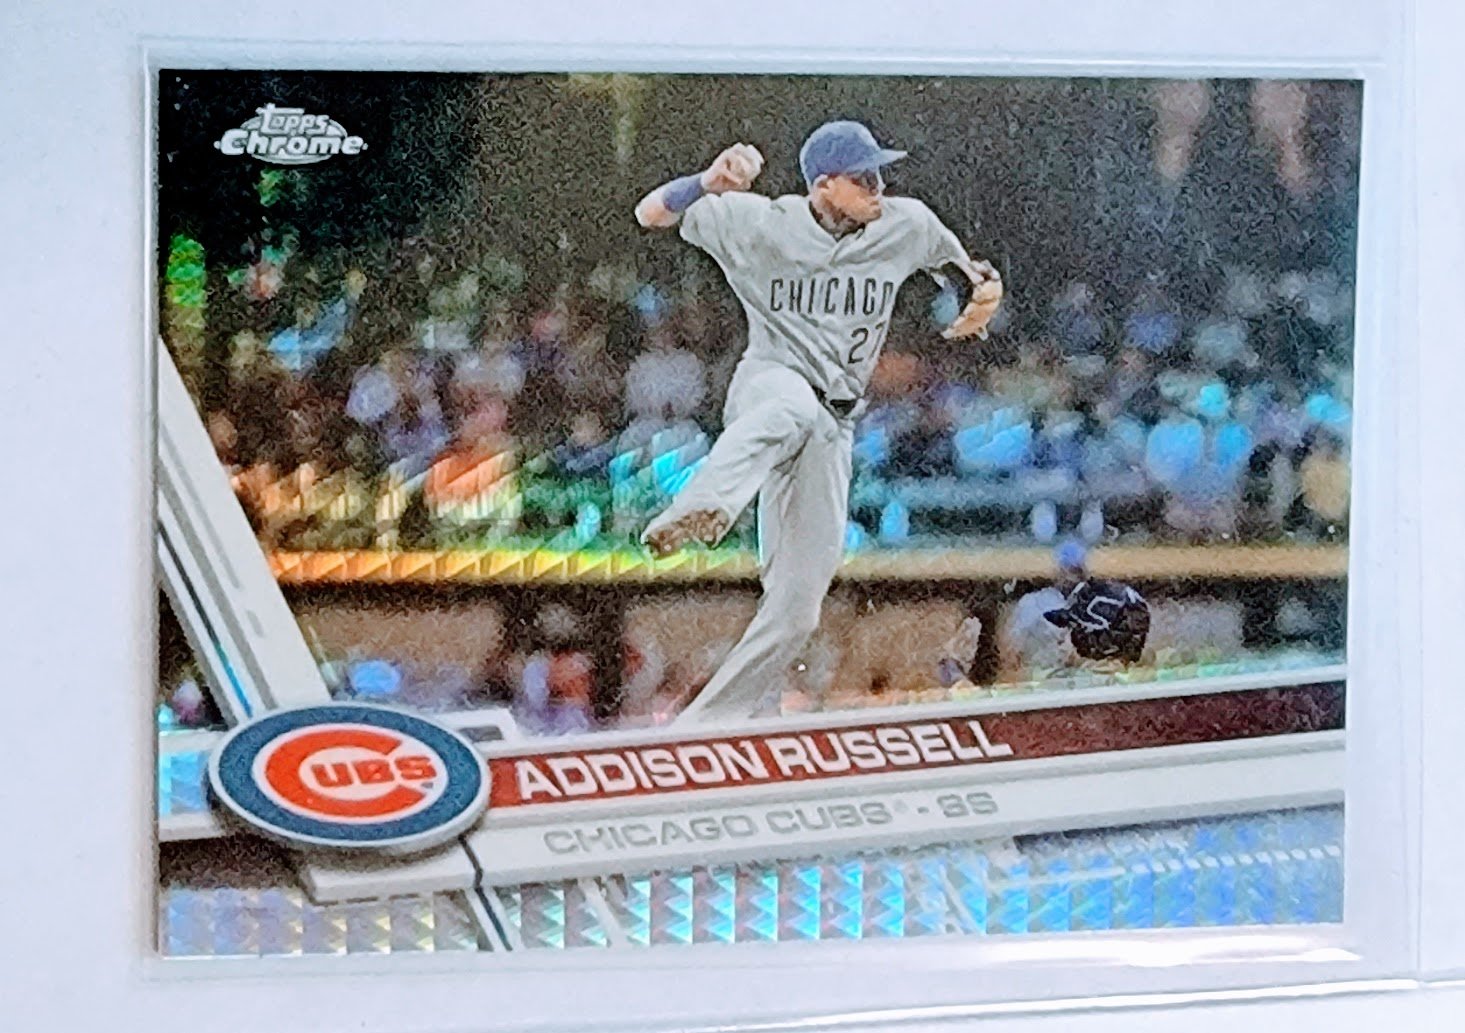 2017 Topps Chrome Addison Russell Prism Refractor Baseball Card TPTV simple Xclusive Collectibles   